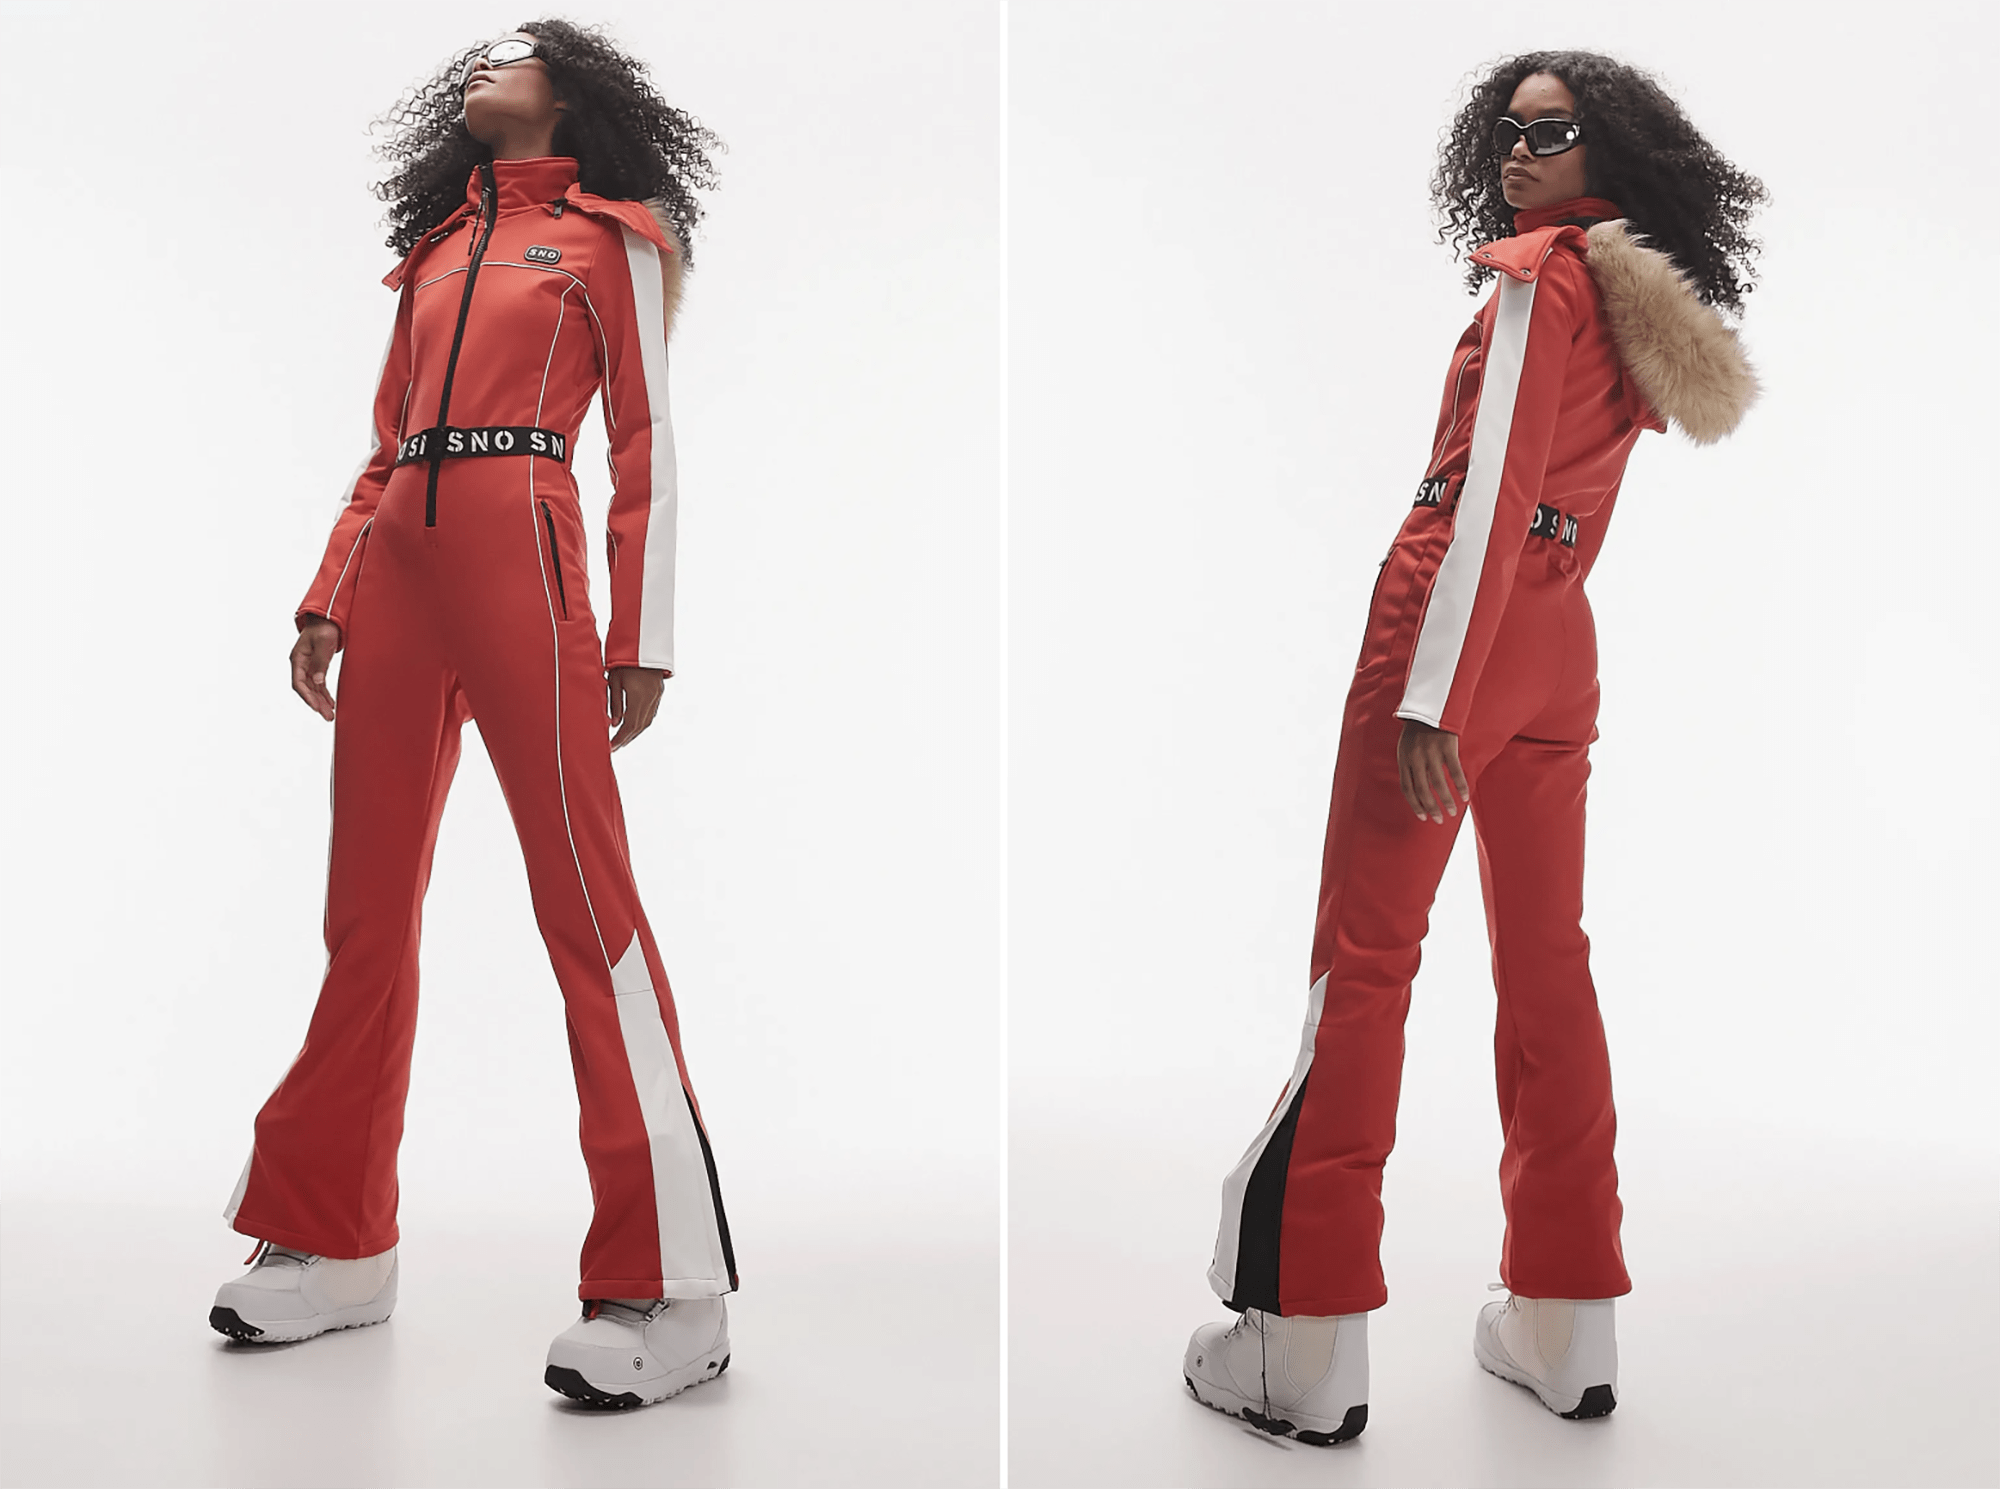 5 designer ski outfits we can't wait to hit the slopes in - Vogue